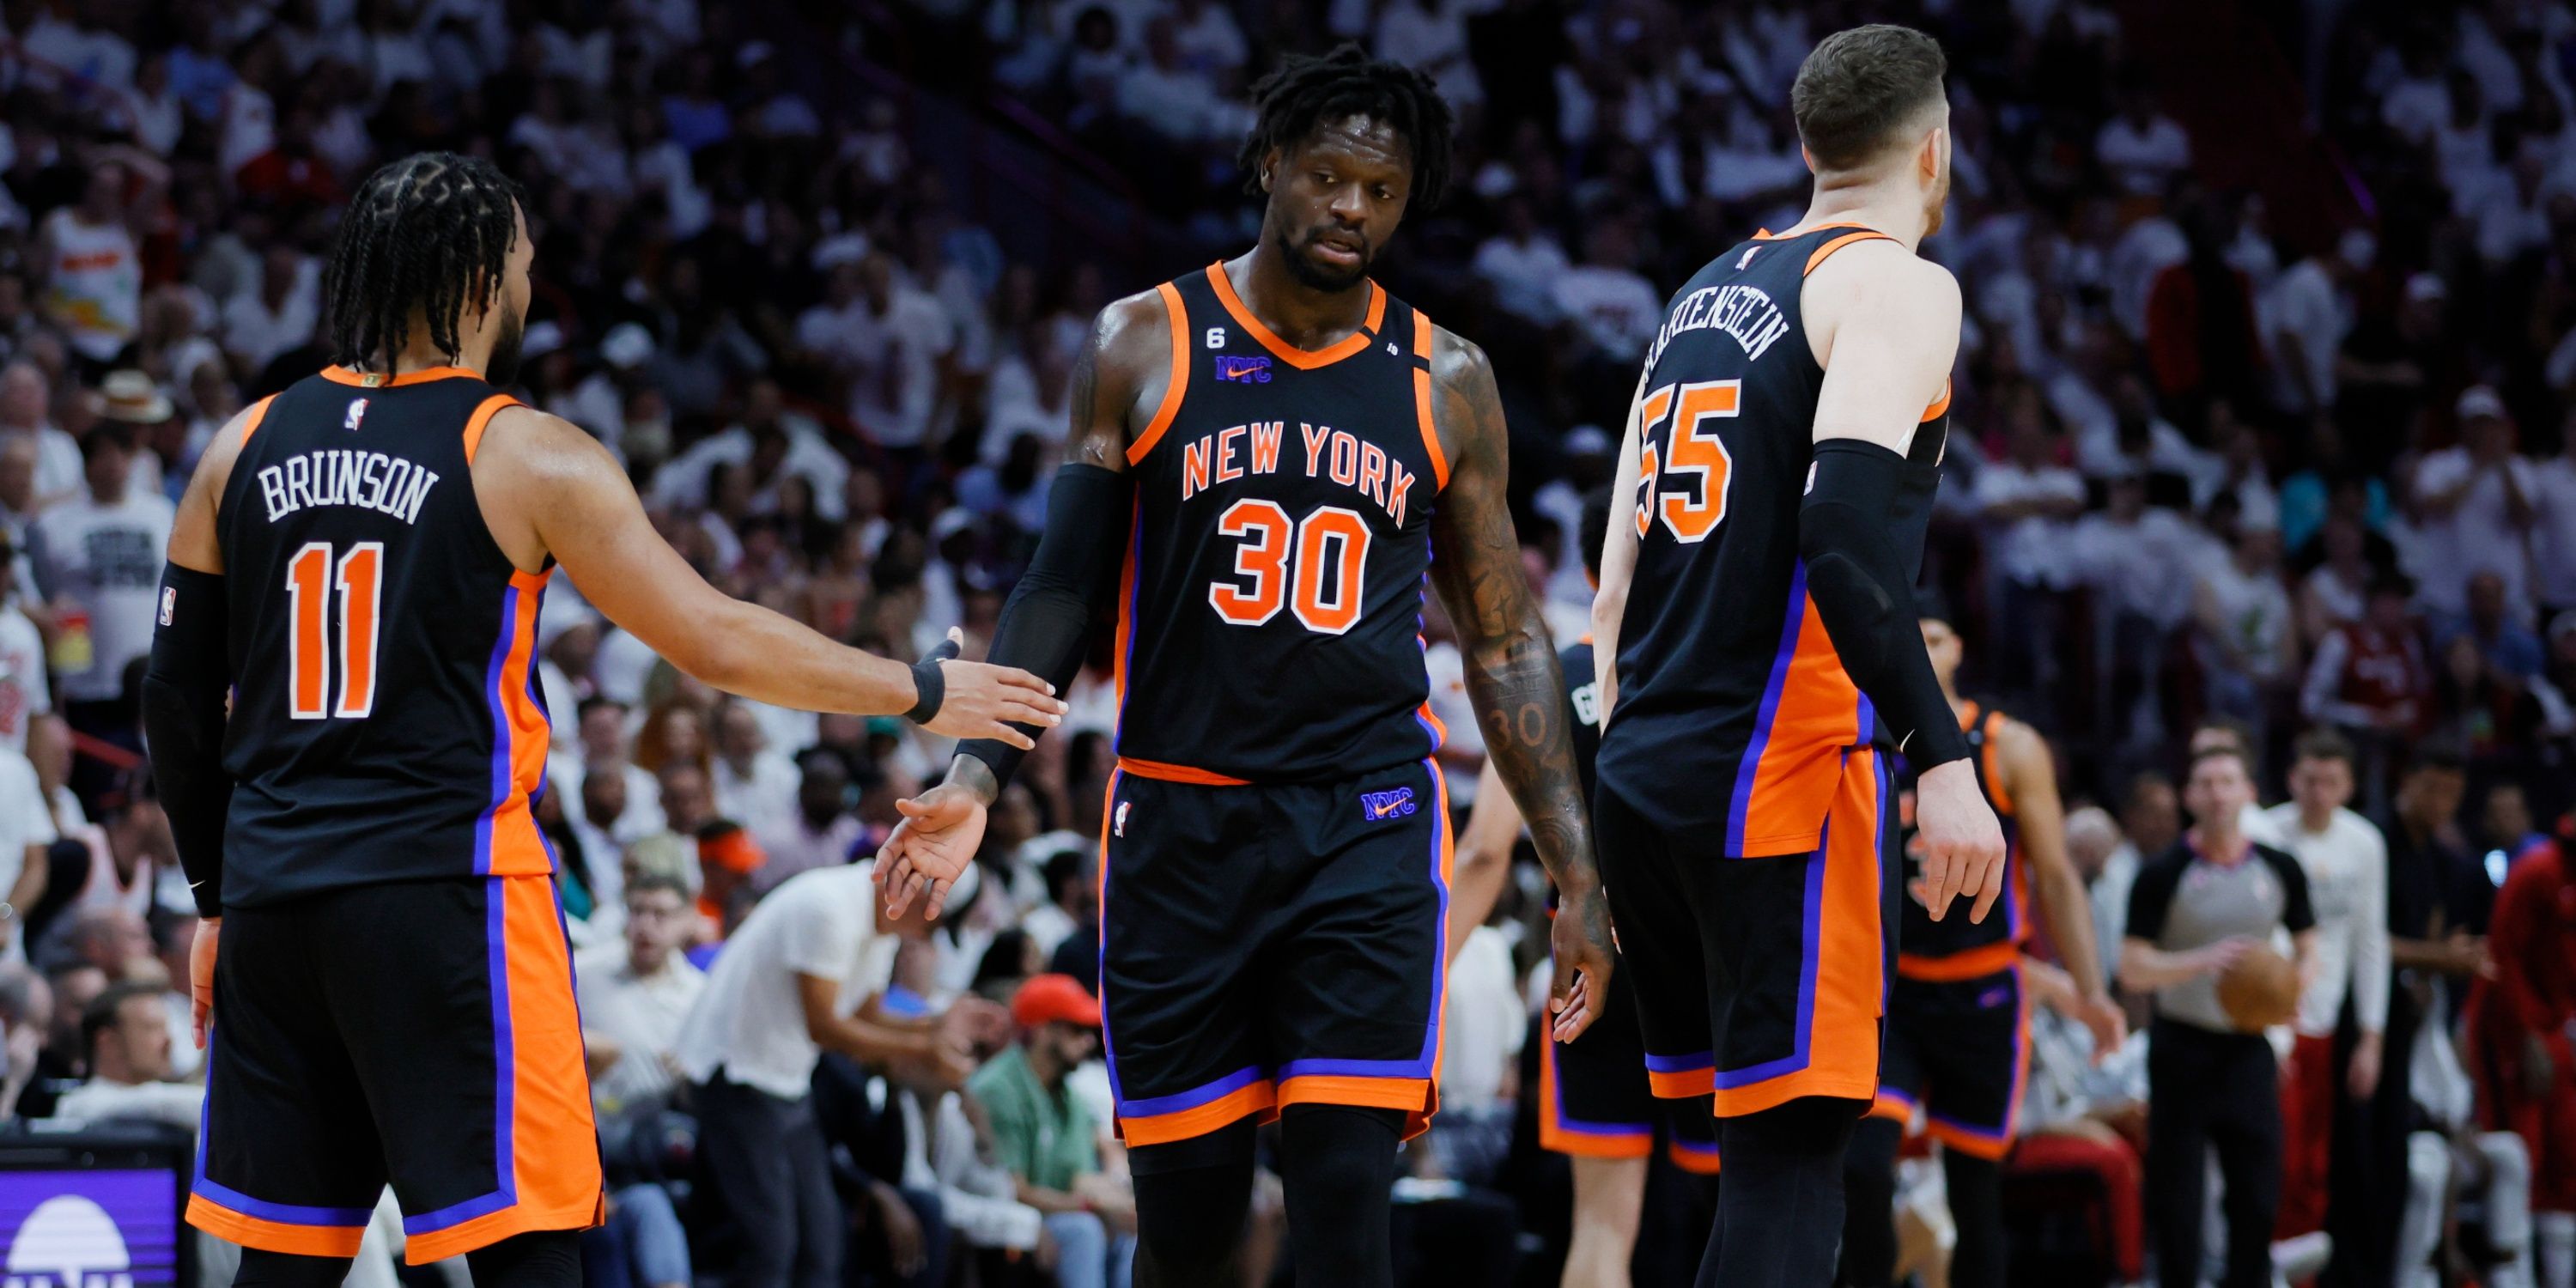 New York Knicks Entire 202324 roster ranked on expected impact